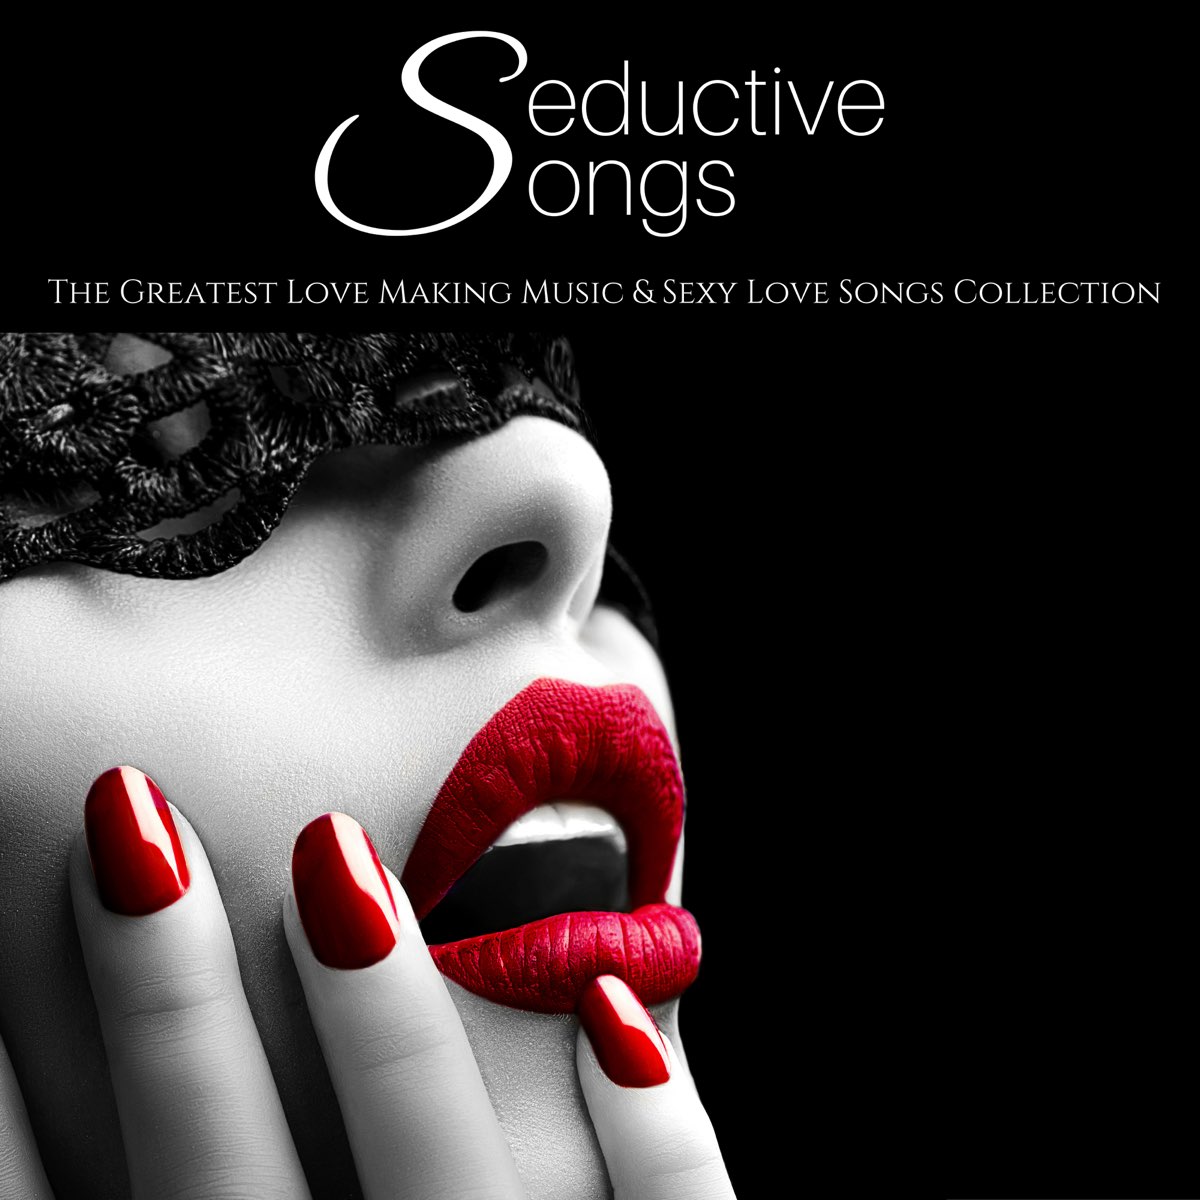 Seductive Songs - The Greatest Love Making Music & Sexy Love Songs  Collection - Album by Sexy Music Buddha Love Dj - Apple Music